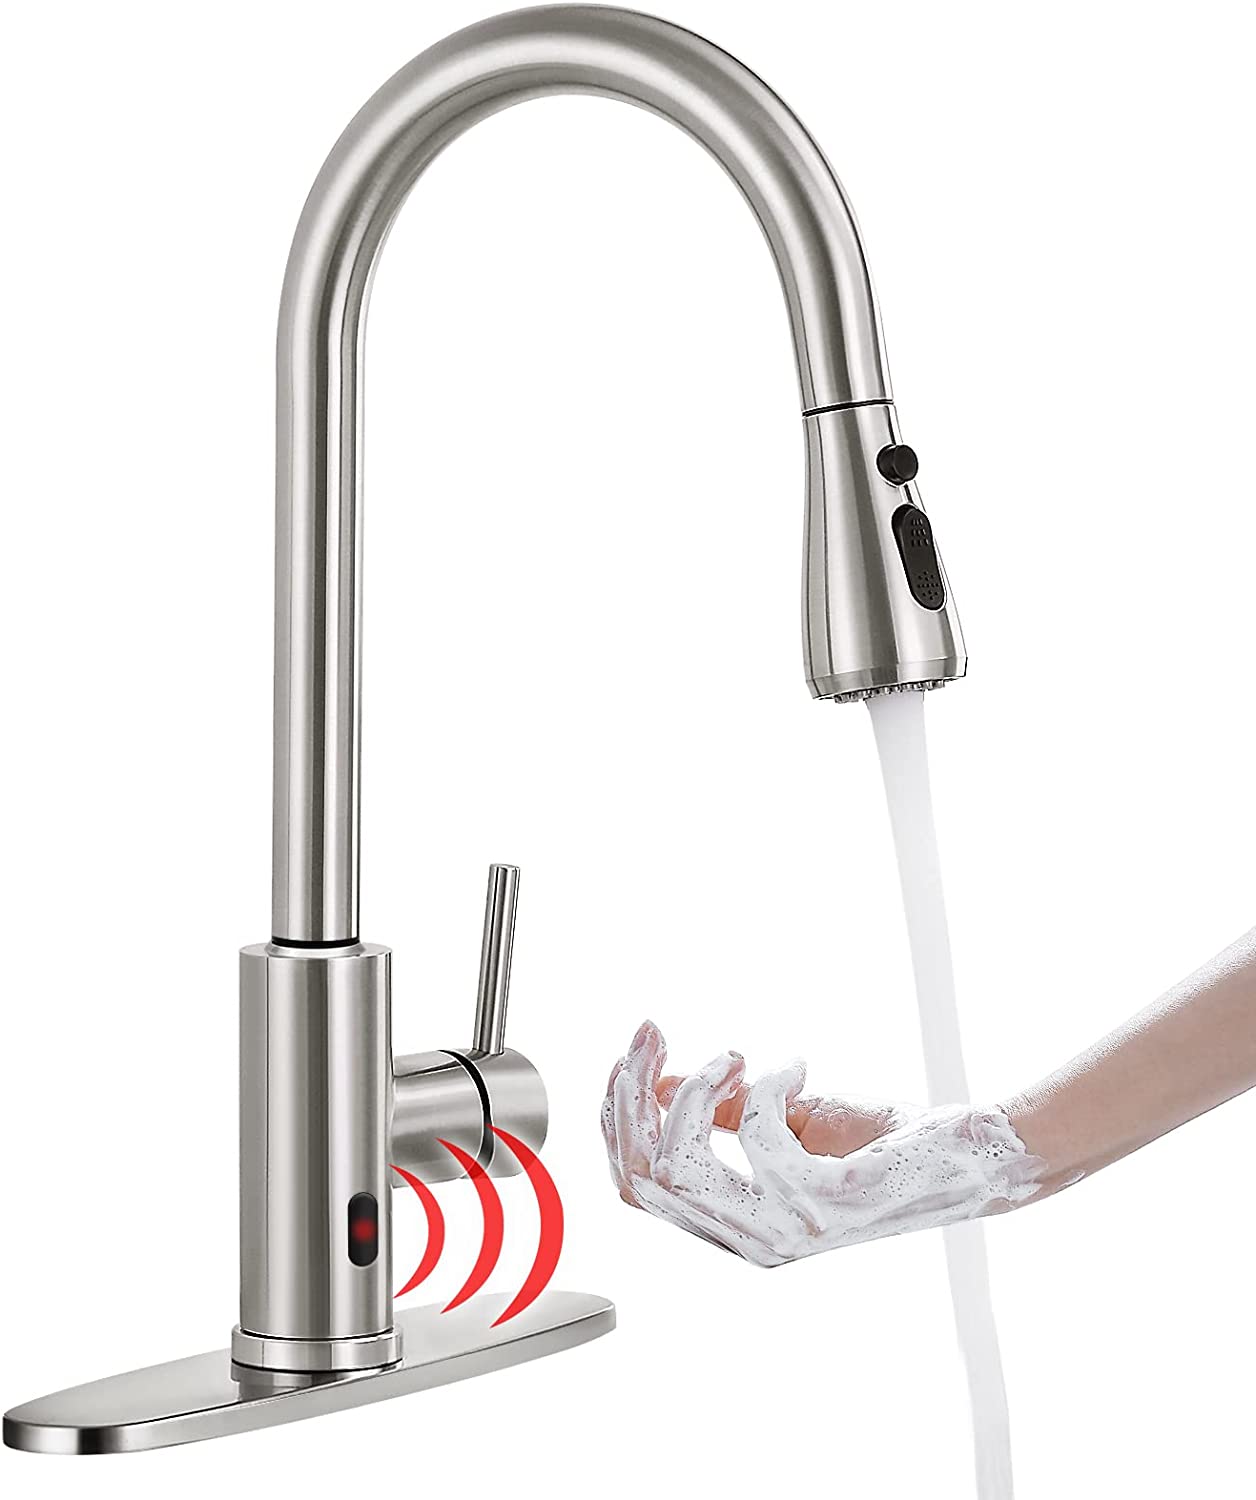 hands free kitchen faucet detailed review